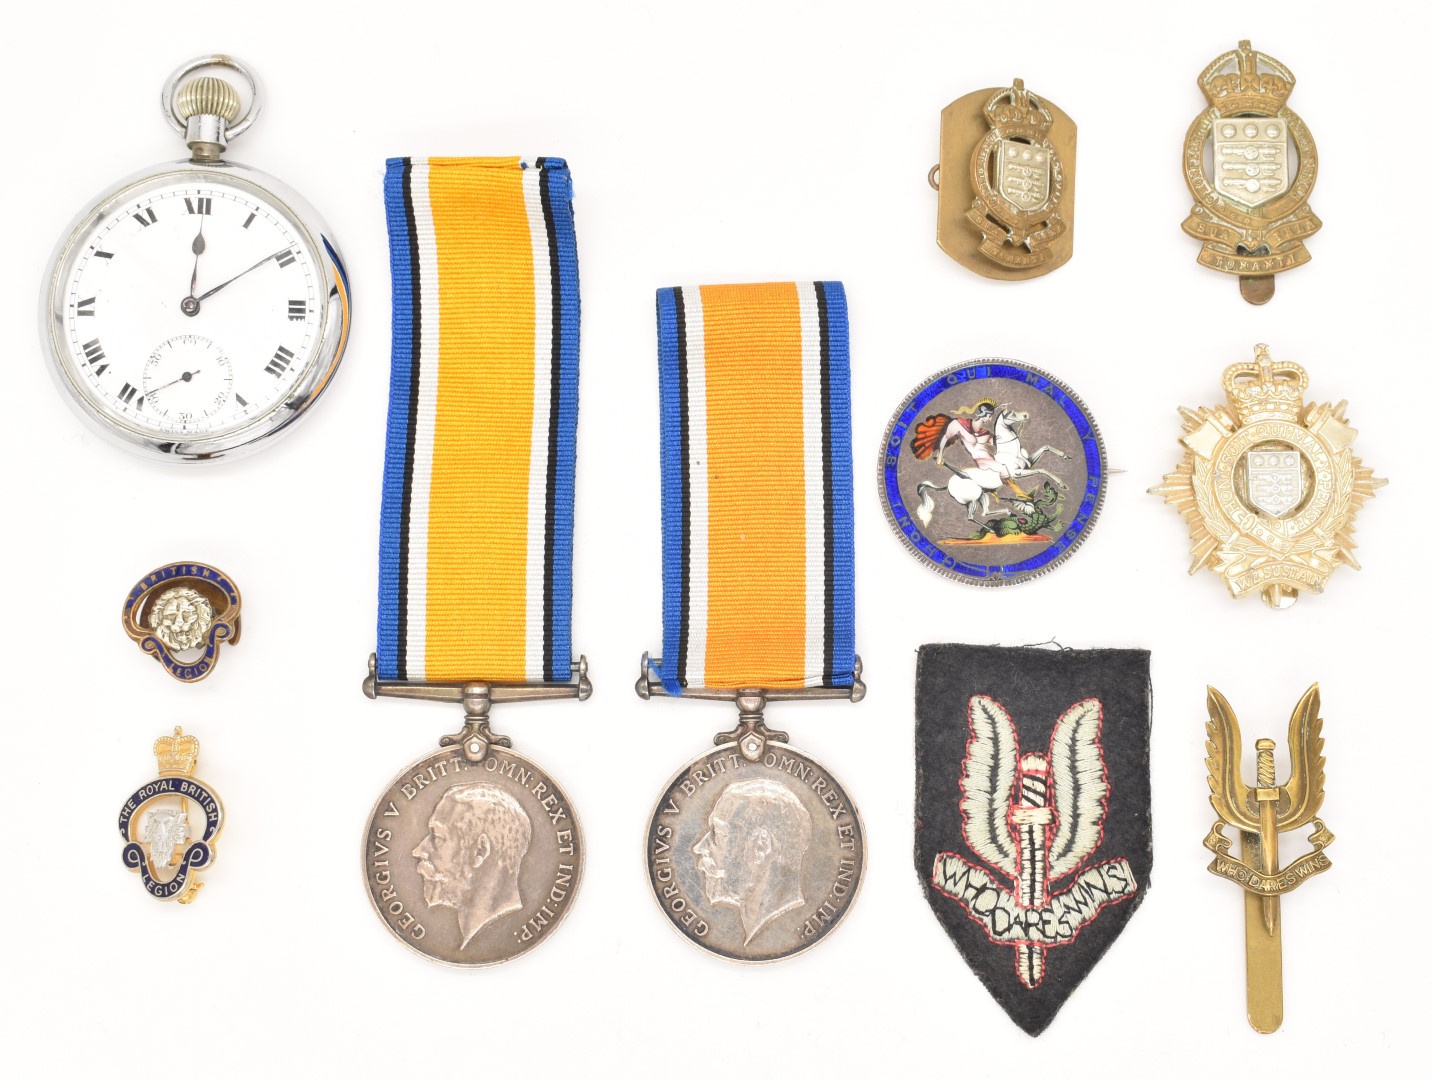 Two WW1 War Medals named to 41814 Pte G Pegler, Somerset Light Infantry and J17694 FC Pegler, A.B